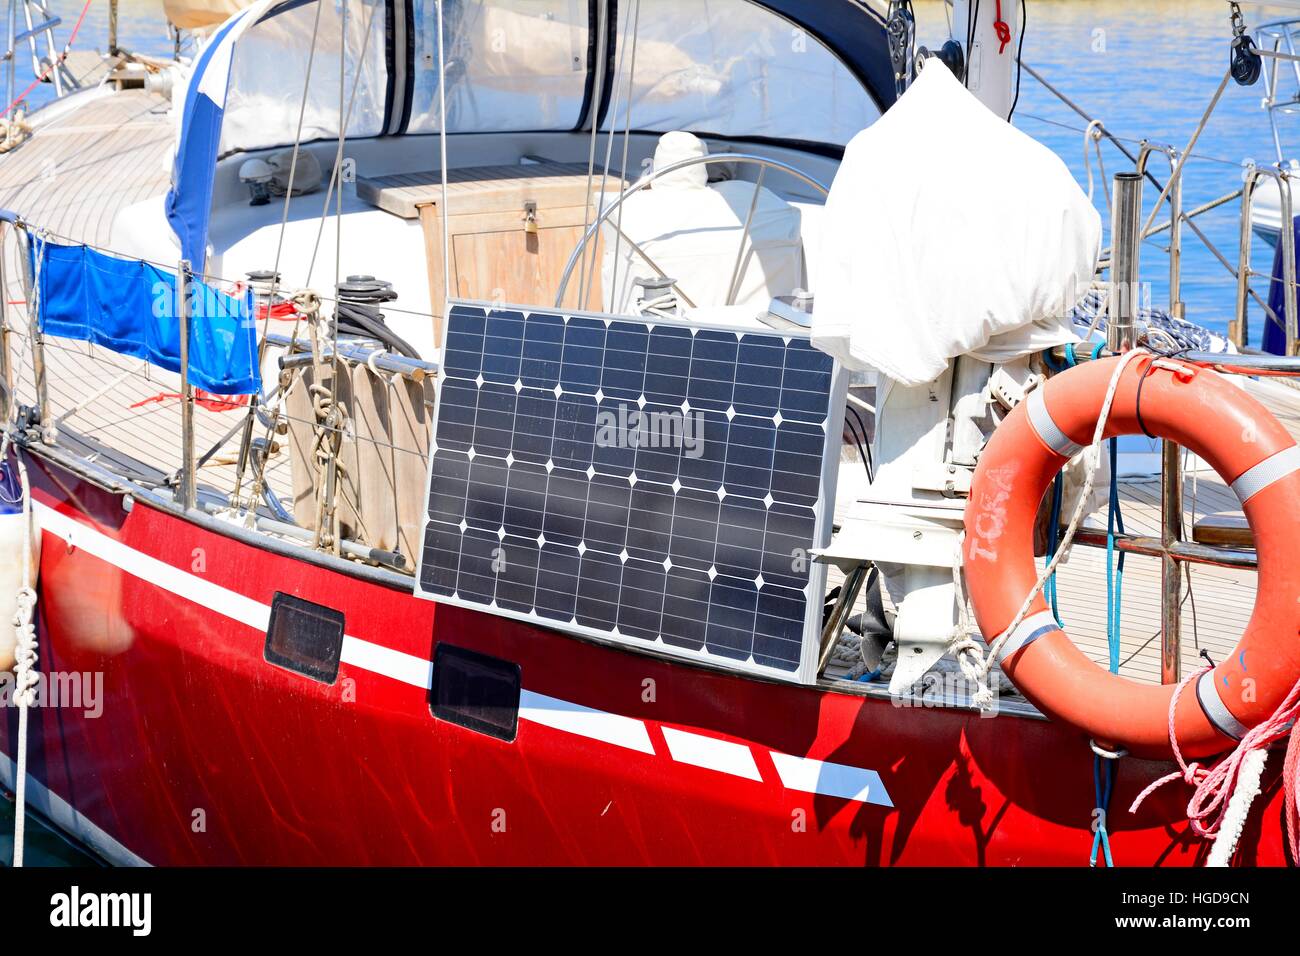 Solar panel on the side of a yacht in the harbour, Chania, Crete, Greece, Europe. Stock Photo